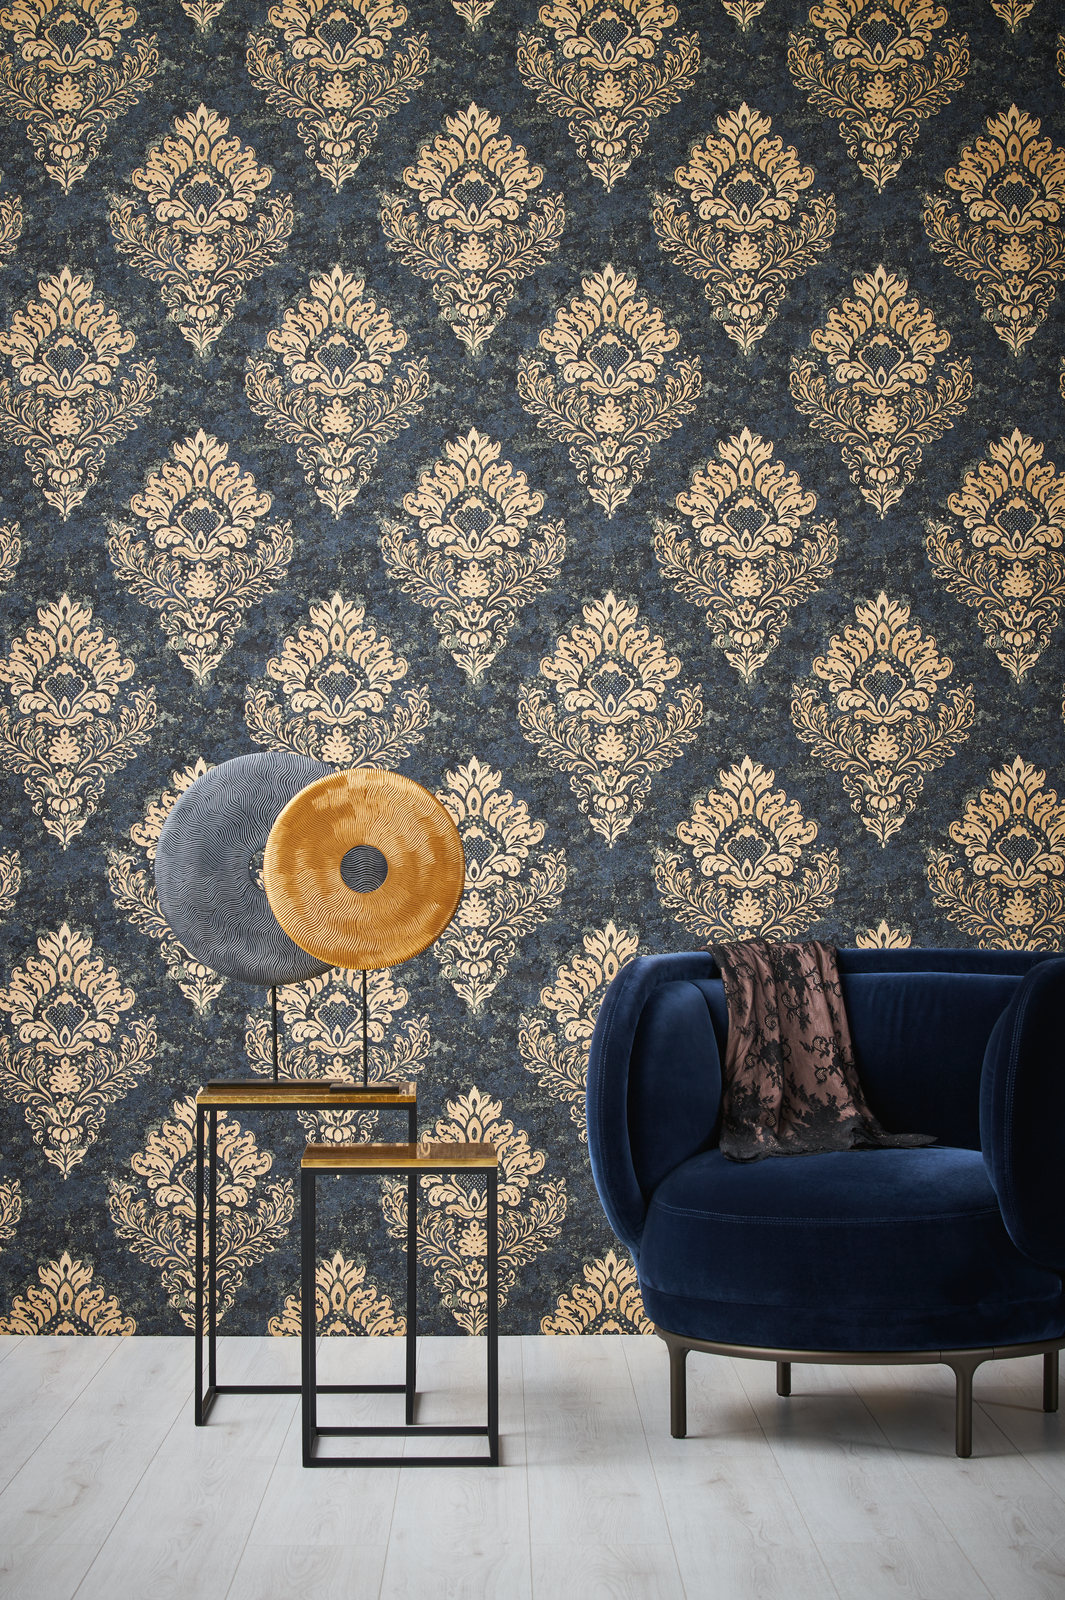             Ornamental wallpaper with floral style & gold effect - beige, blue, brown
        